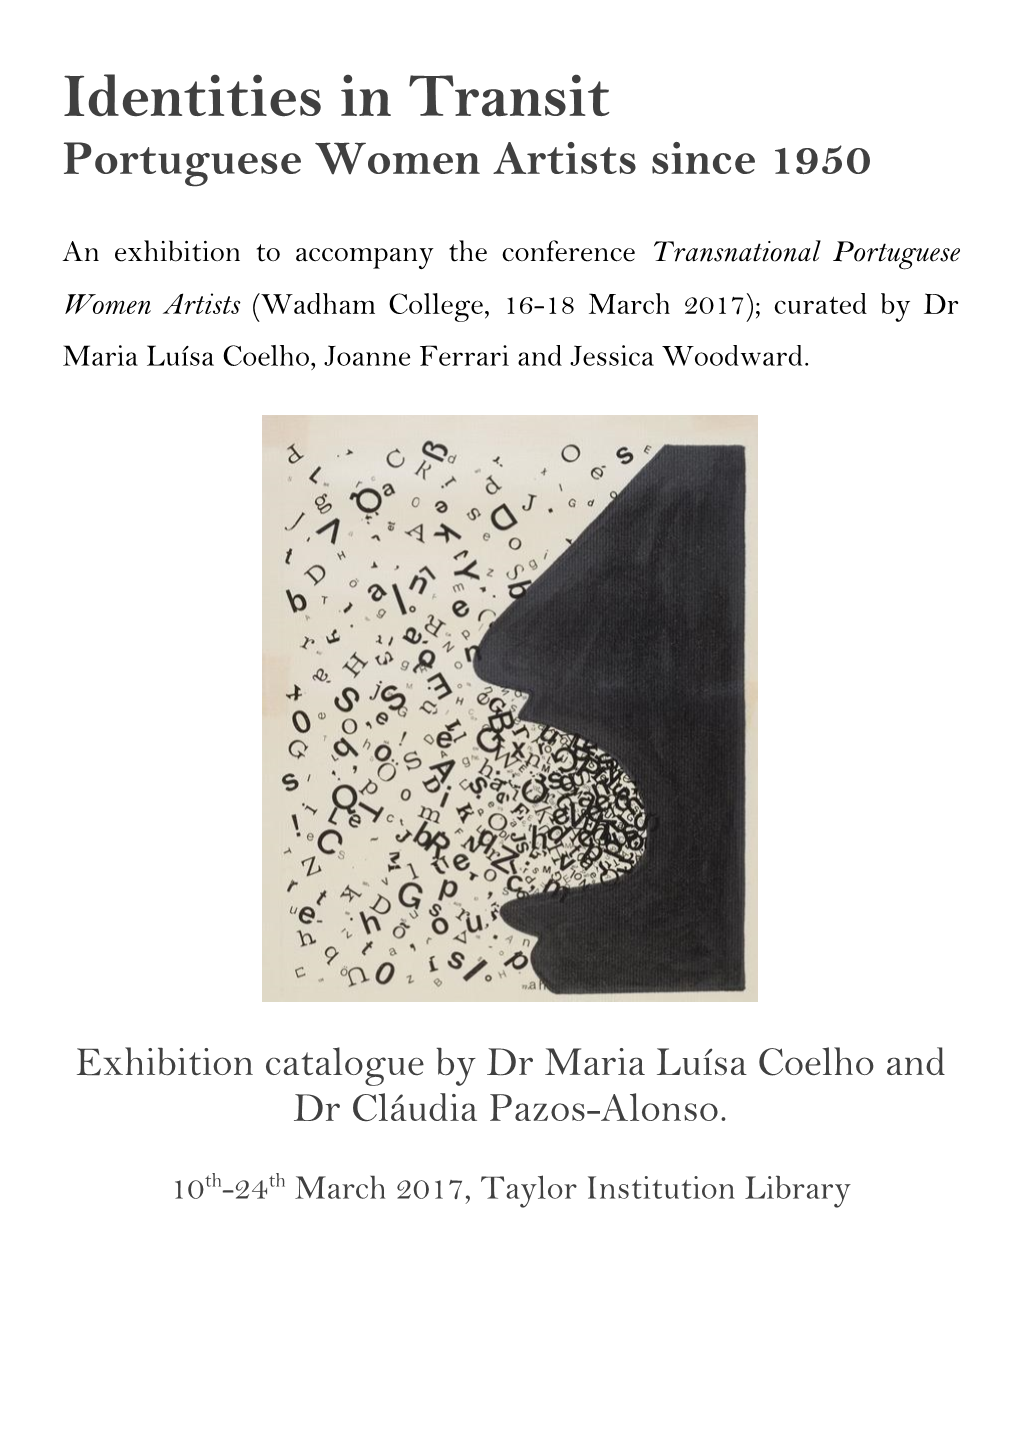 View the Exhibition Catalogue